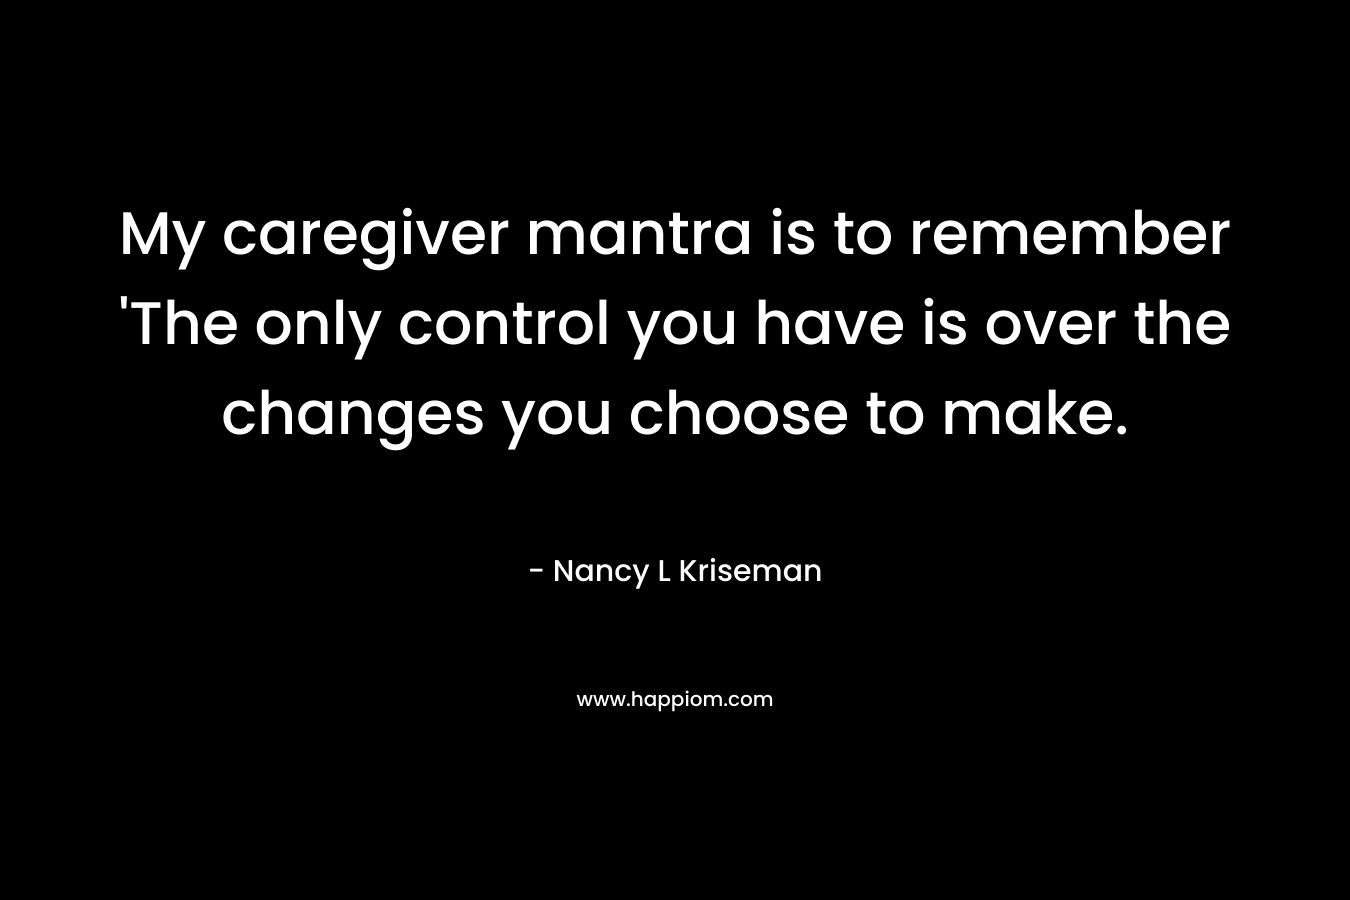 My caregiver mantra is to remember ‘The only control you have is over the changes you choose to make. – Nancy L Kriseman